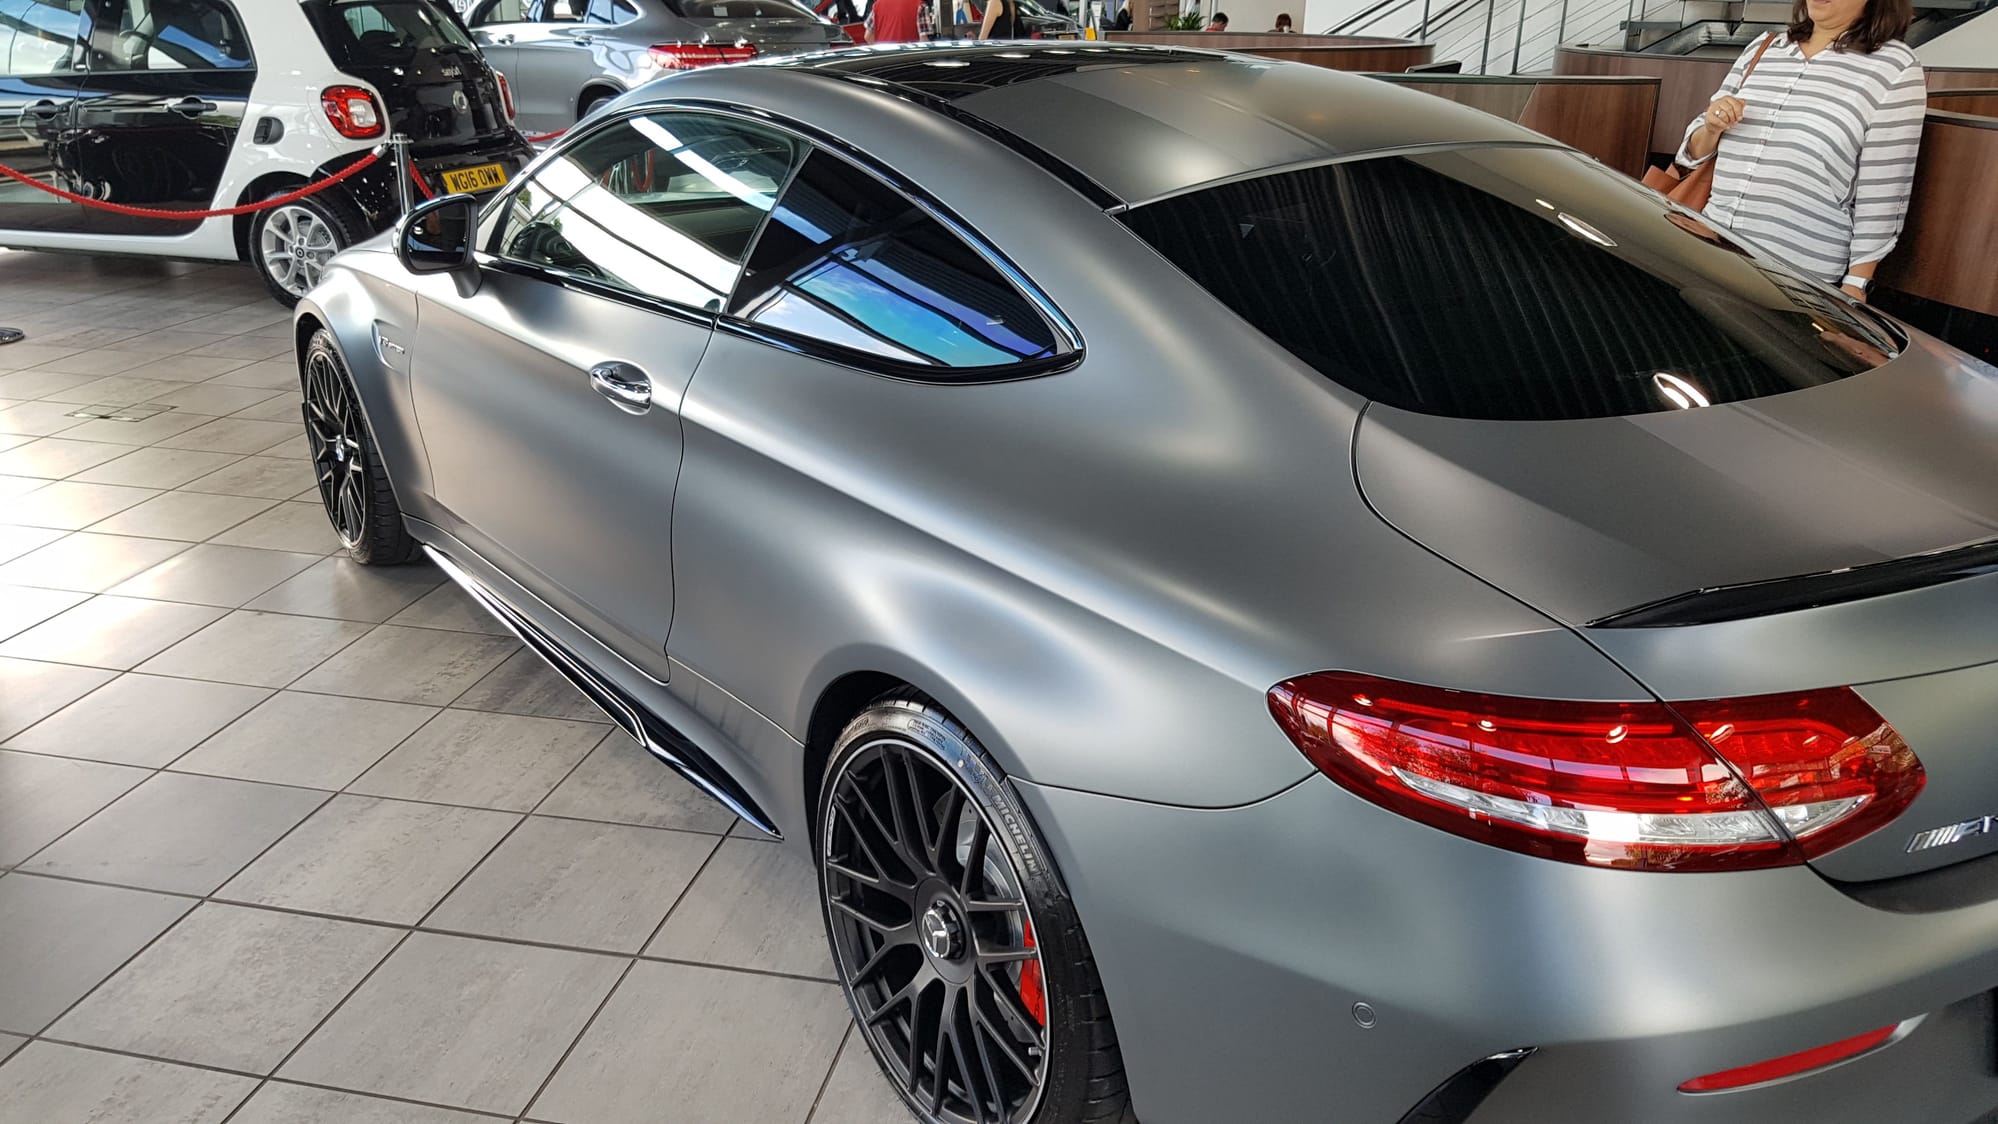 Mercedes-AMG C63S Coupe in Selenite Grey (PICS) - Page 39 - MBWorld.org ...